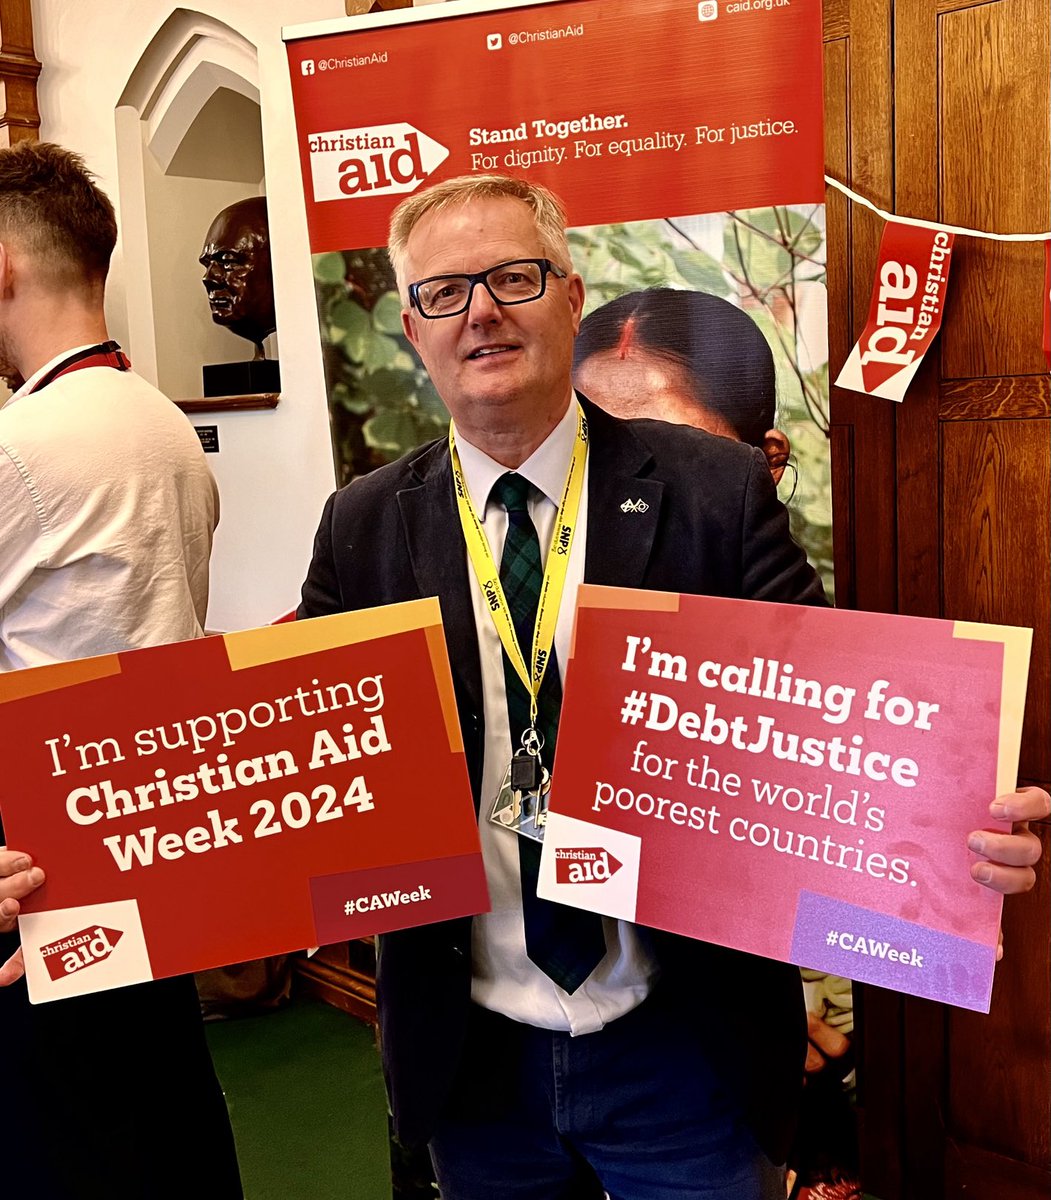 Delighted once again to have the opportunity to give my full support to the wonderful folk at ⁦@christian_aid⁩ and their 2024 campaign calling for #DebtJustice for the world’s poorest countries. #caweek